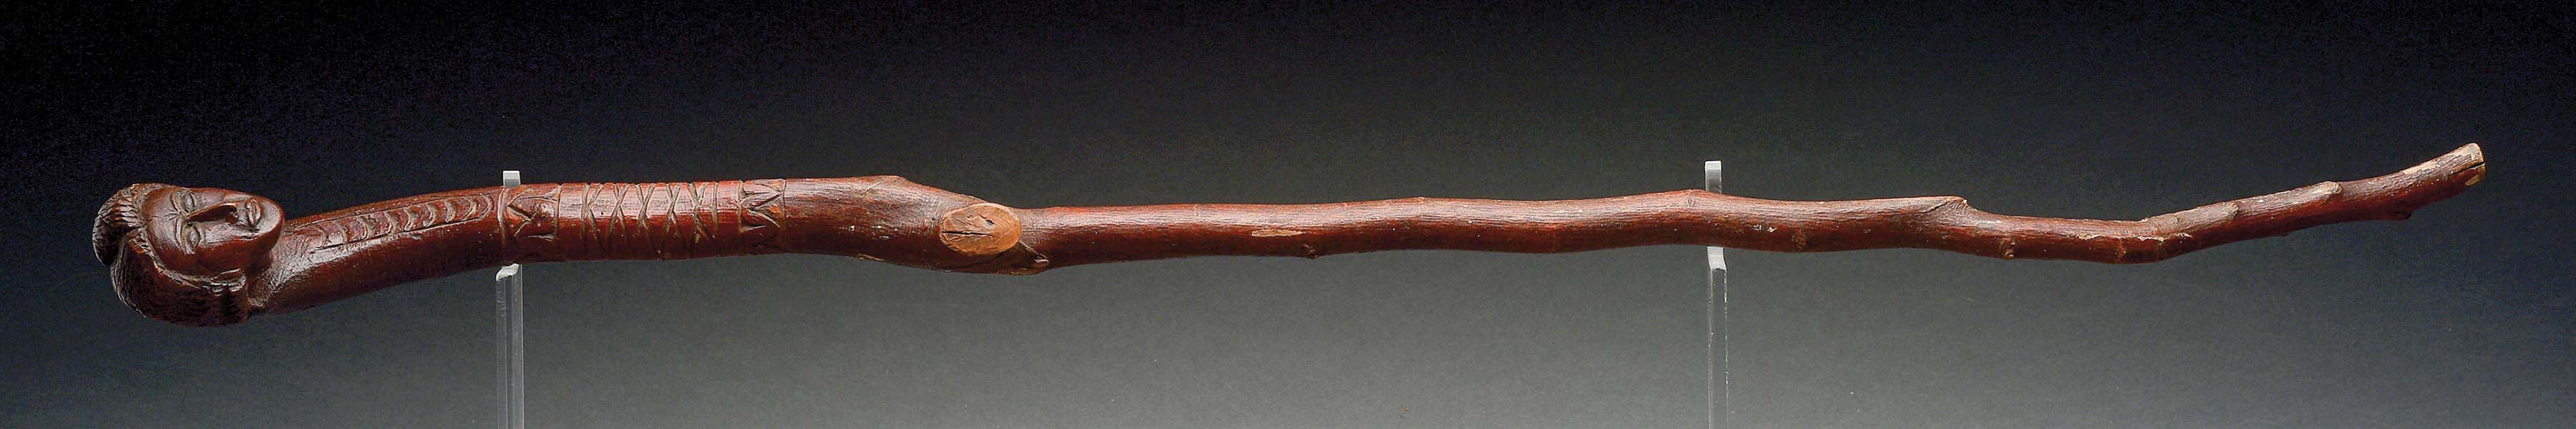 GOOD FIGURAL CARVED 18TH CENTURY CANE.